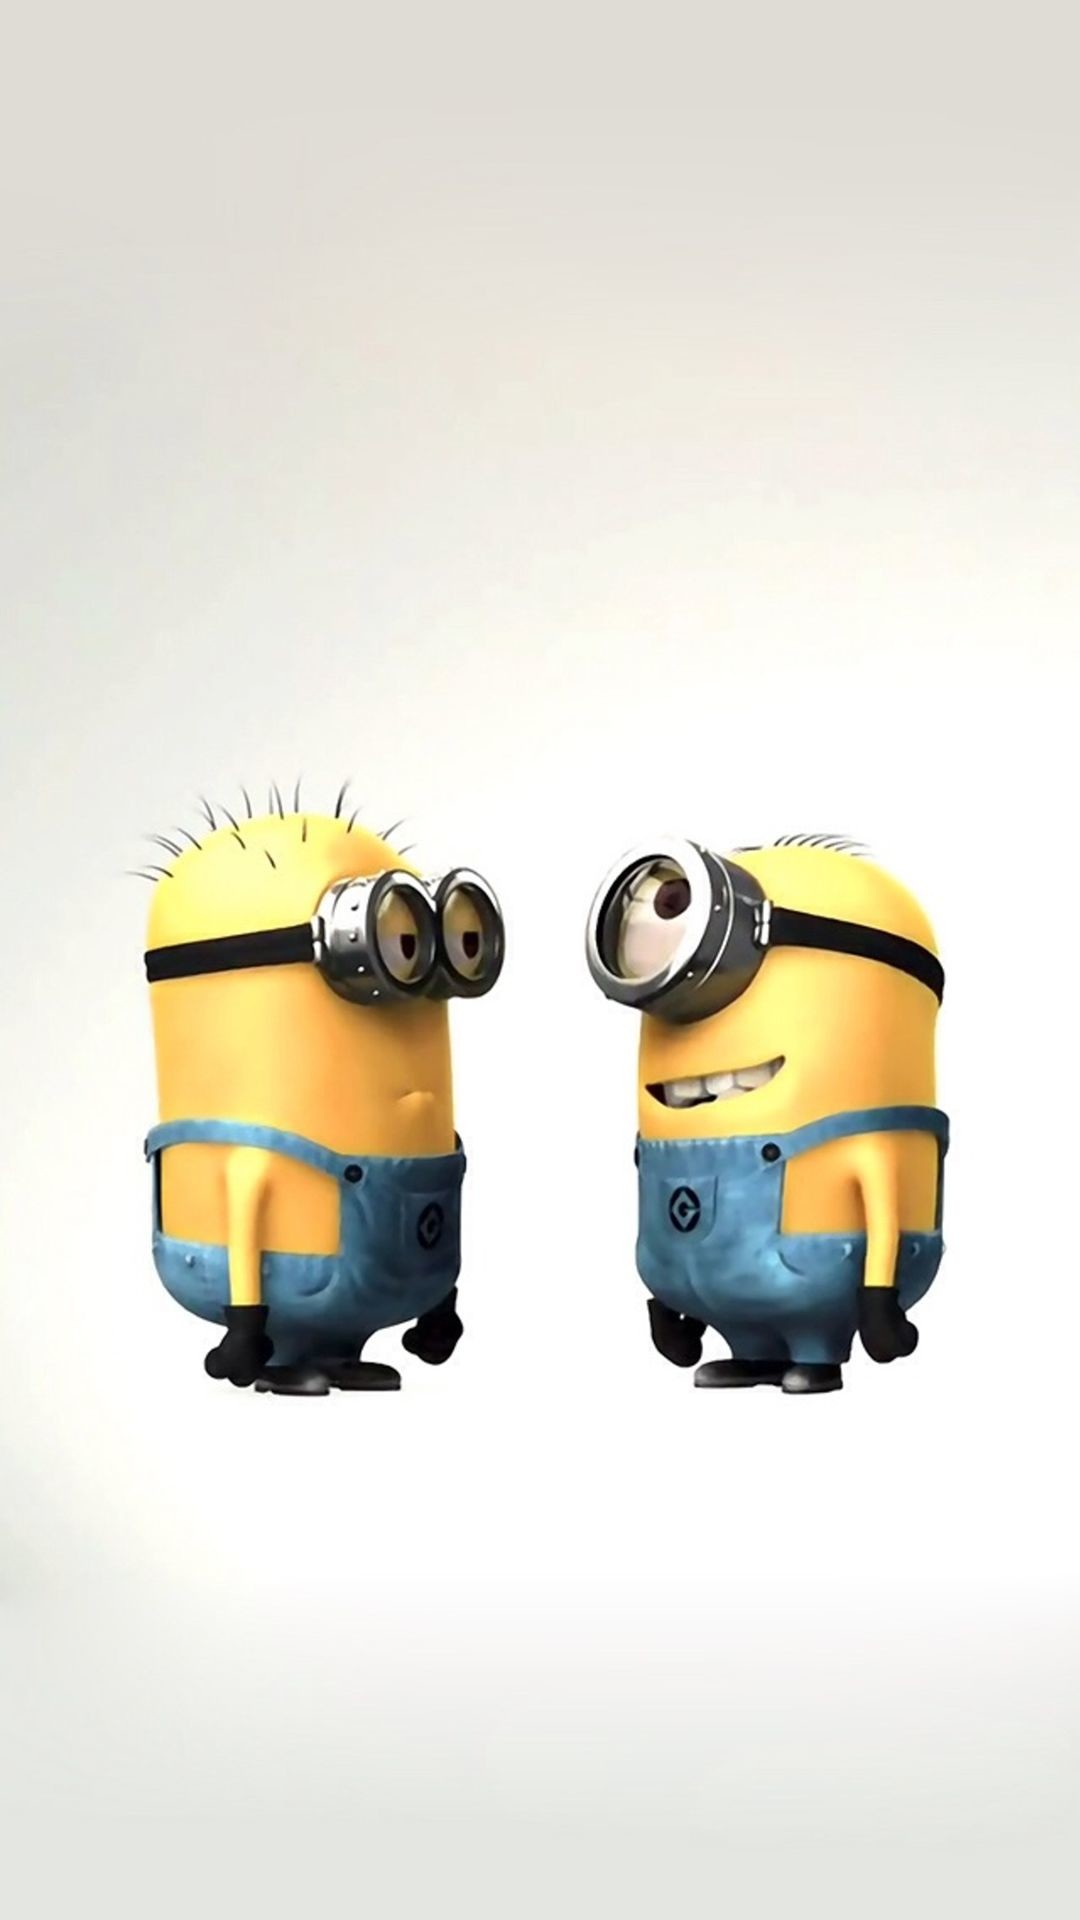 1080x1920 Funny Cute Lovely Minion Couple #iPhone #6 #plus #wallpaper